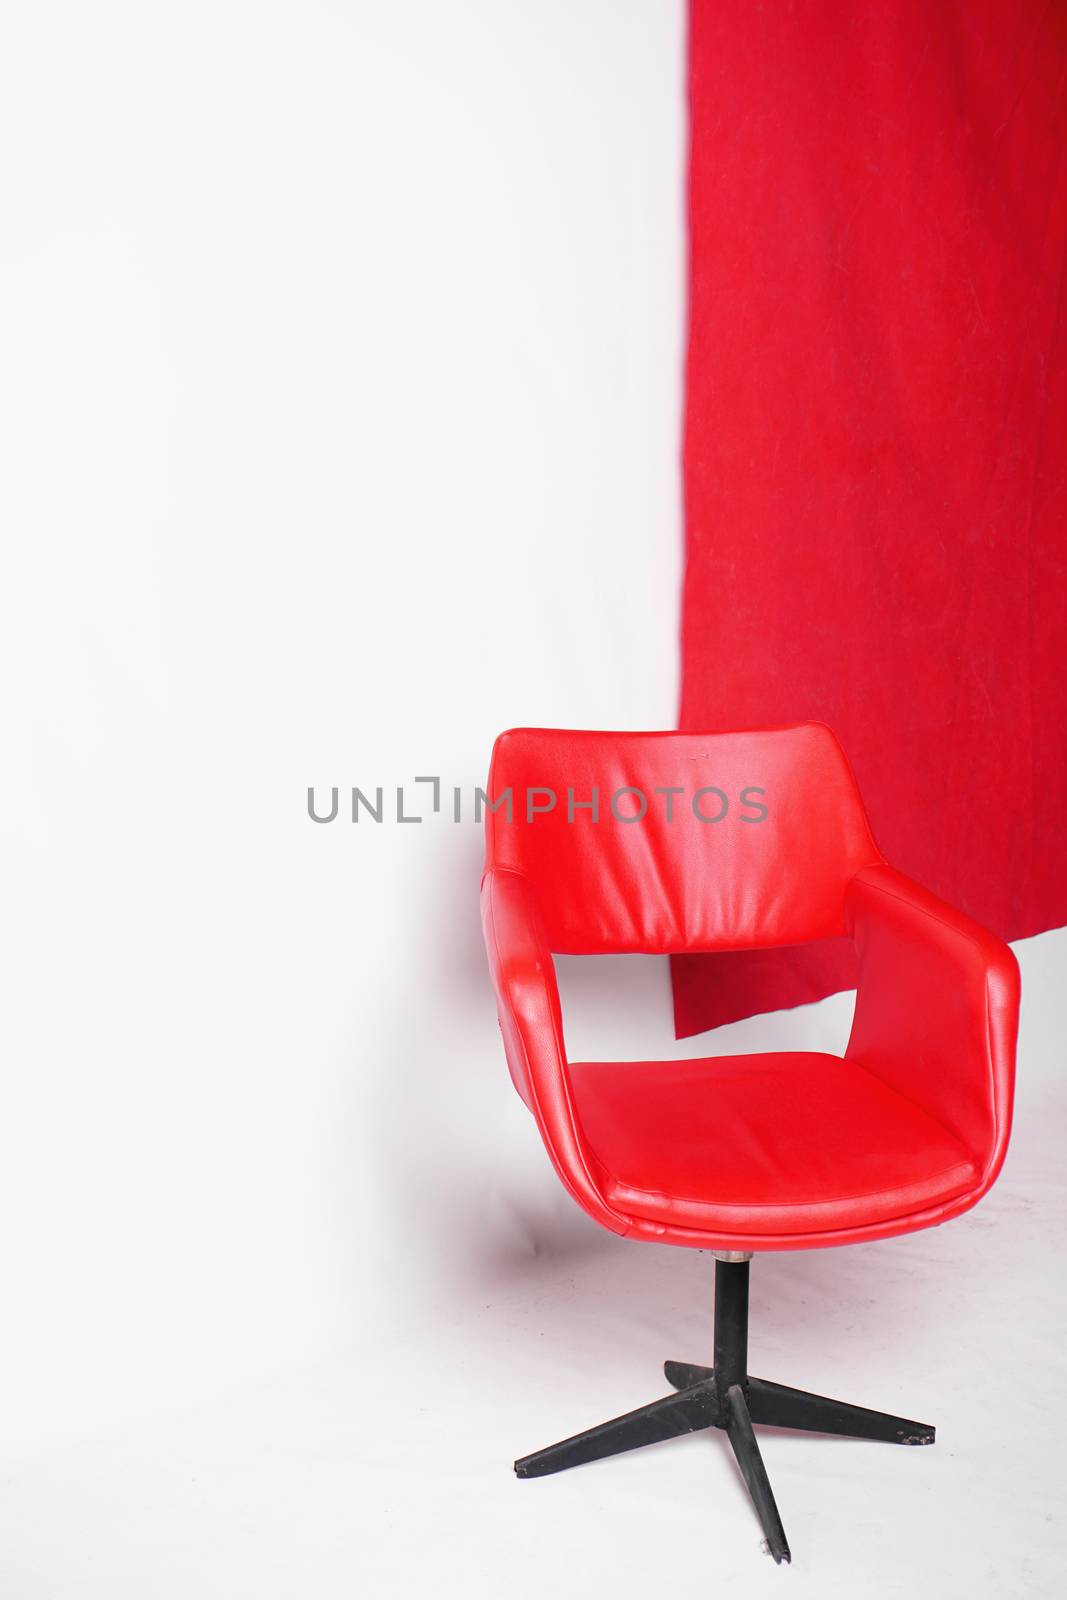 Modern red armchair on a white background in the studio by natali_brill